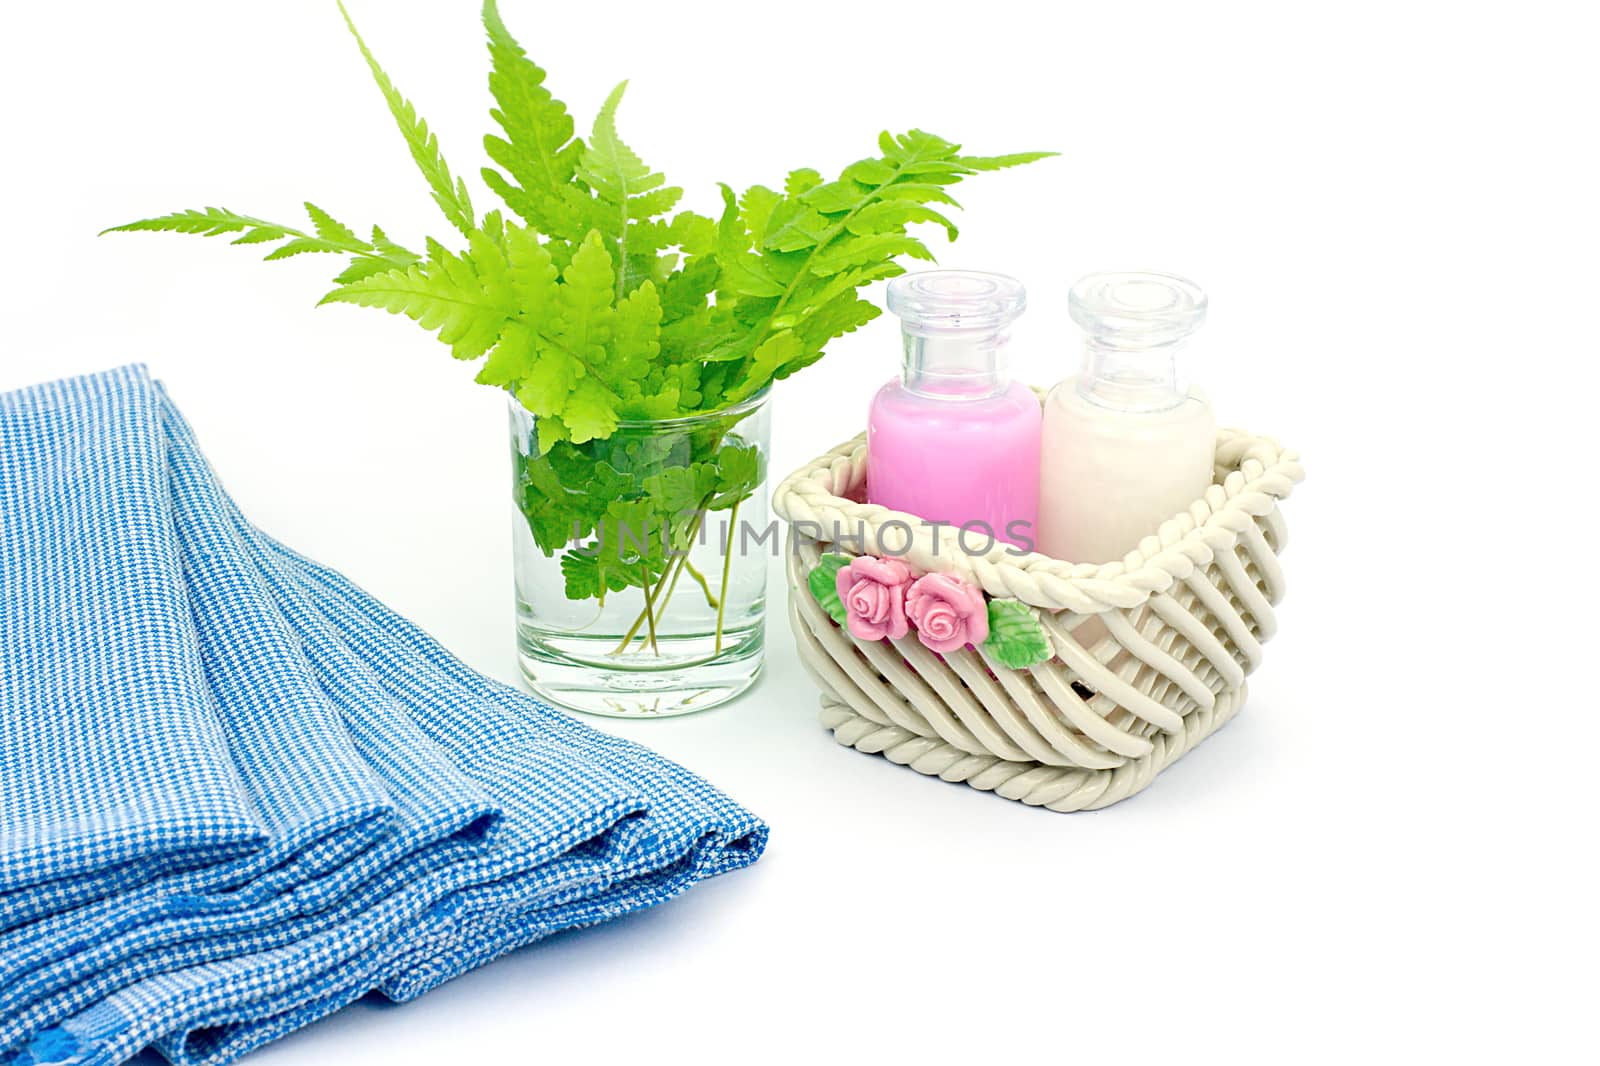 Shampoo and Shower gel put in ceramic basket on white background. Shampoo, Shower gel bottles with blue cloth and green leaves in a glass of water.